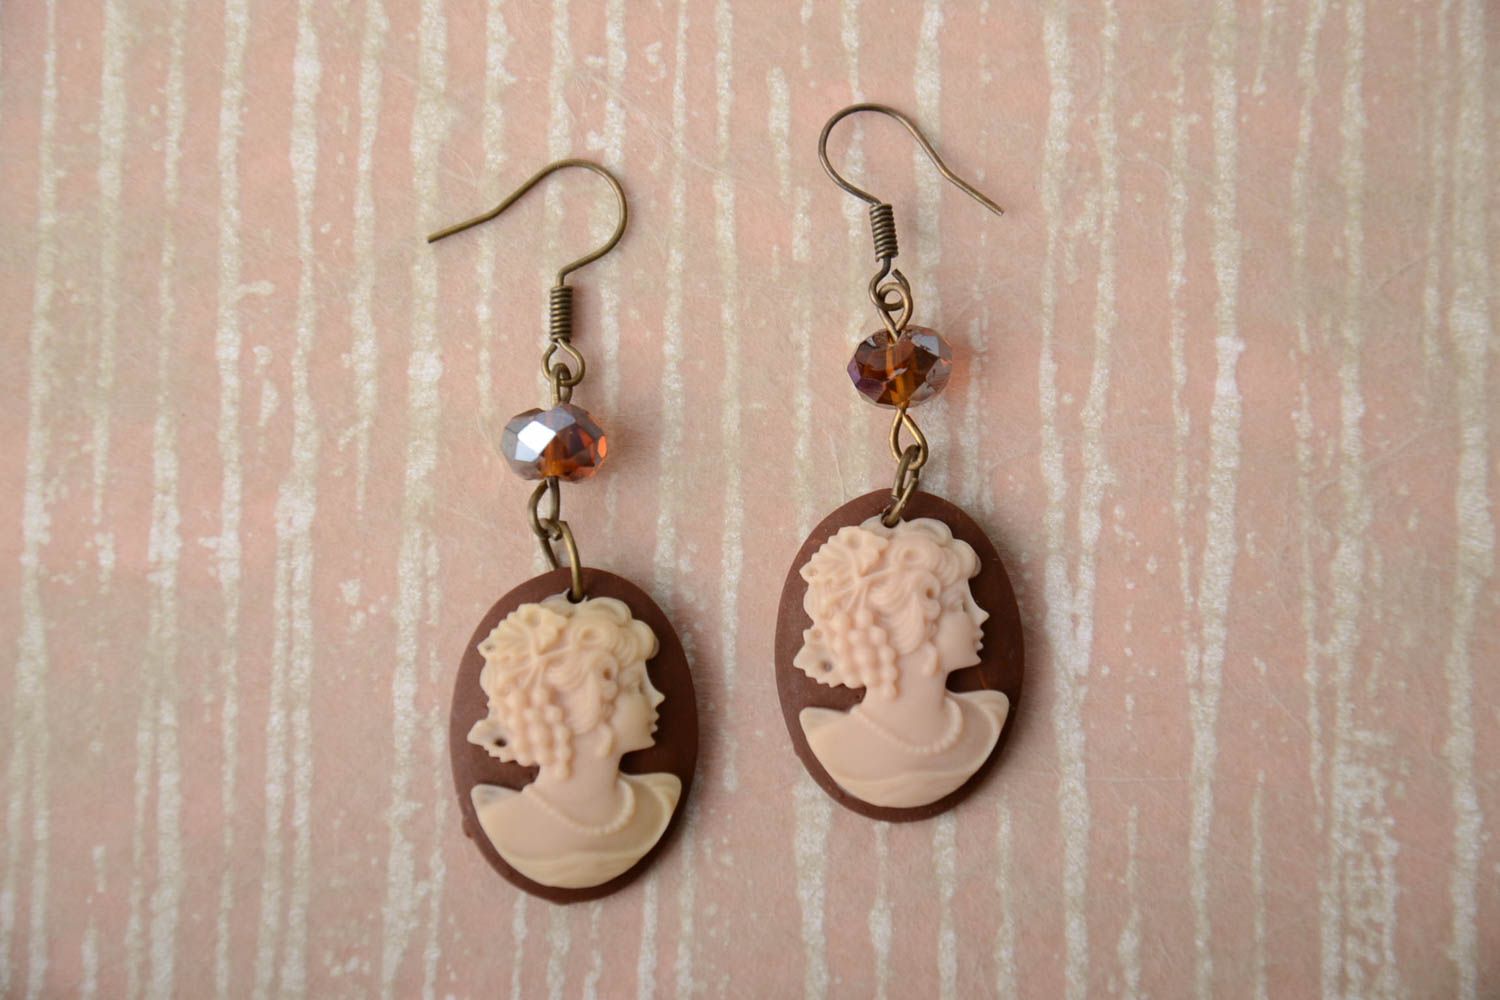 Handmade oval cameo polymer clay dangling earrings in light color palette photo 1